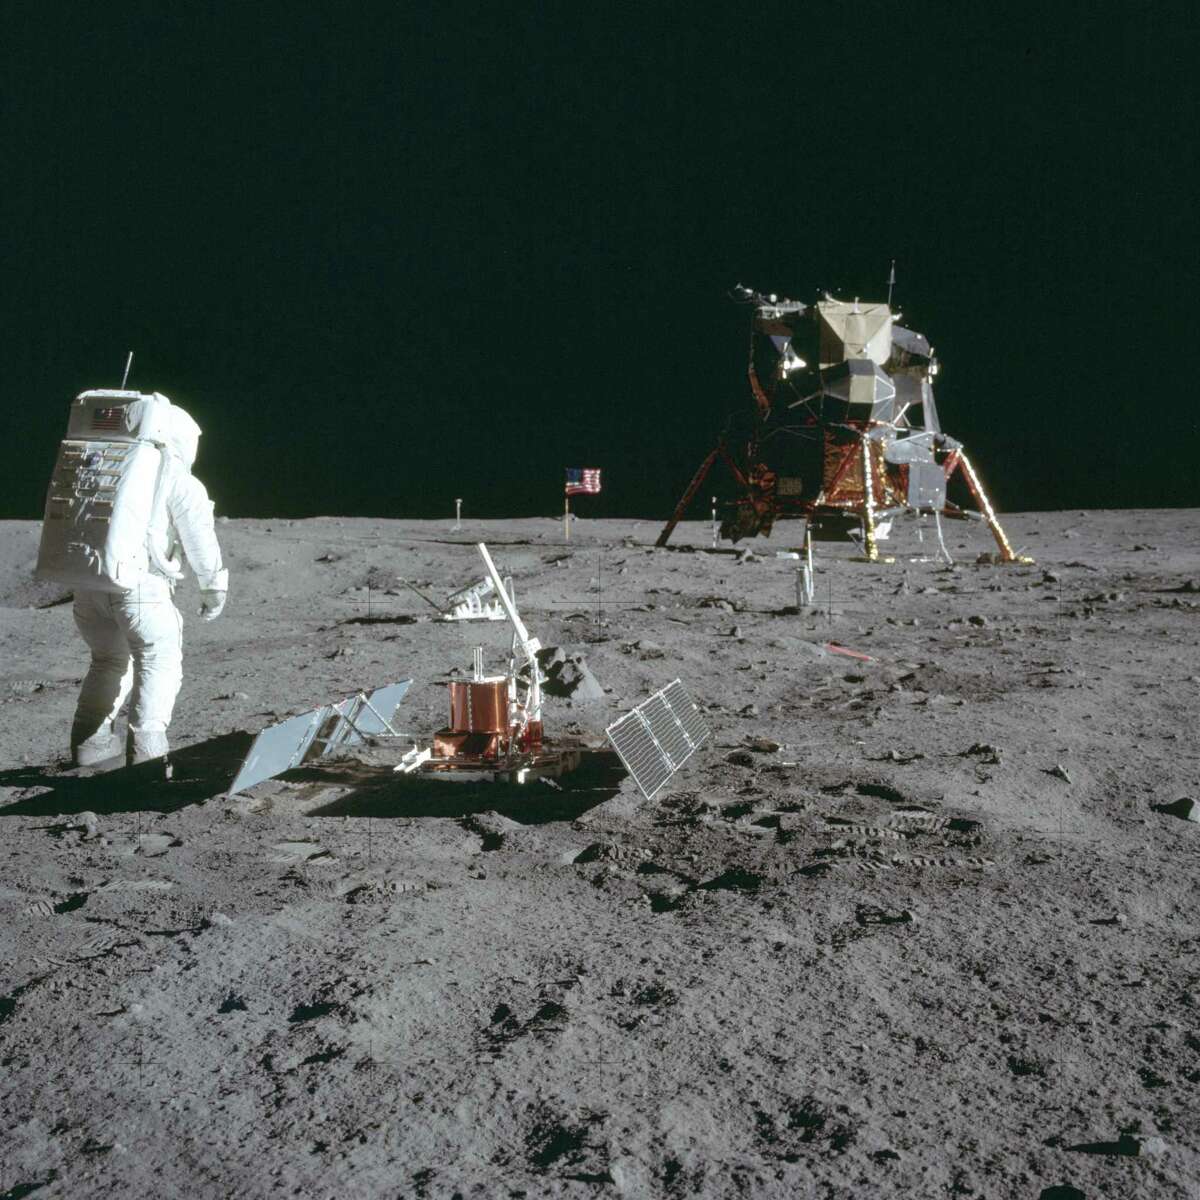 In this July 20, 1969 photo made available by NASA, astronaut Buzz Aldrin Jr. stands next to the Passive Seismic Experiment device on the surface of the the moon during the Apollo 11 mission.